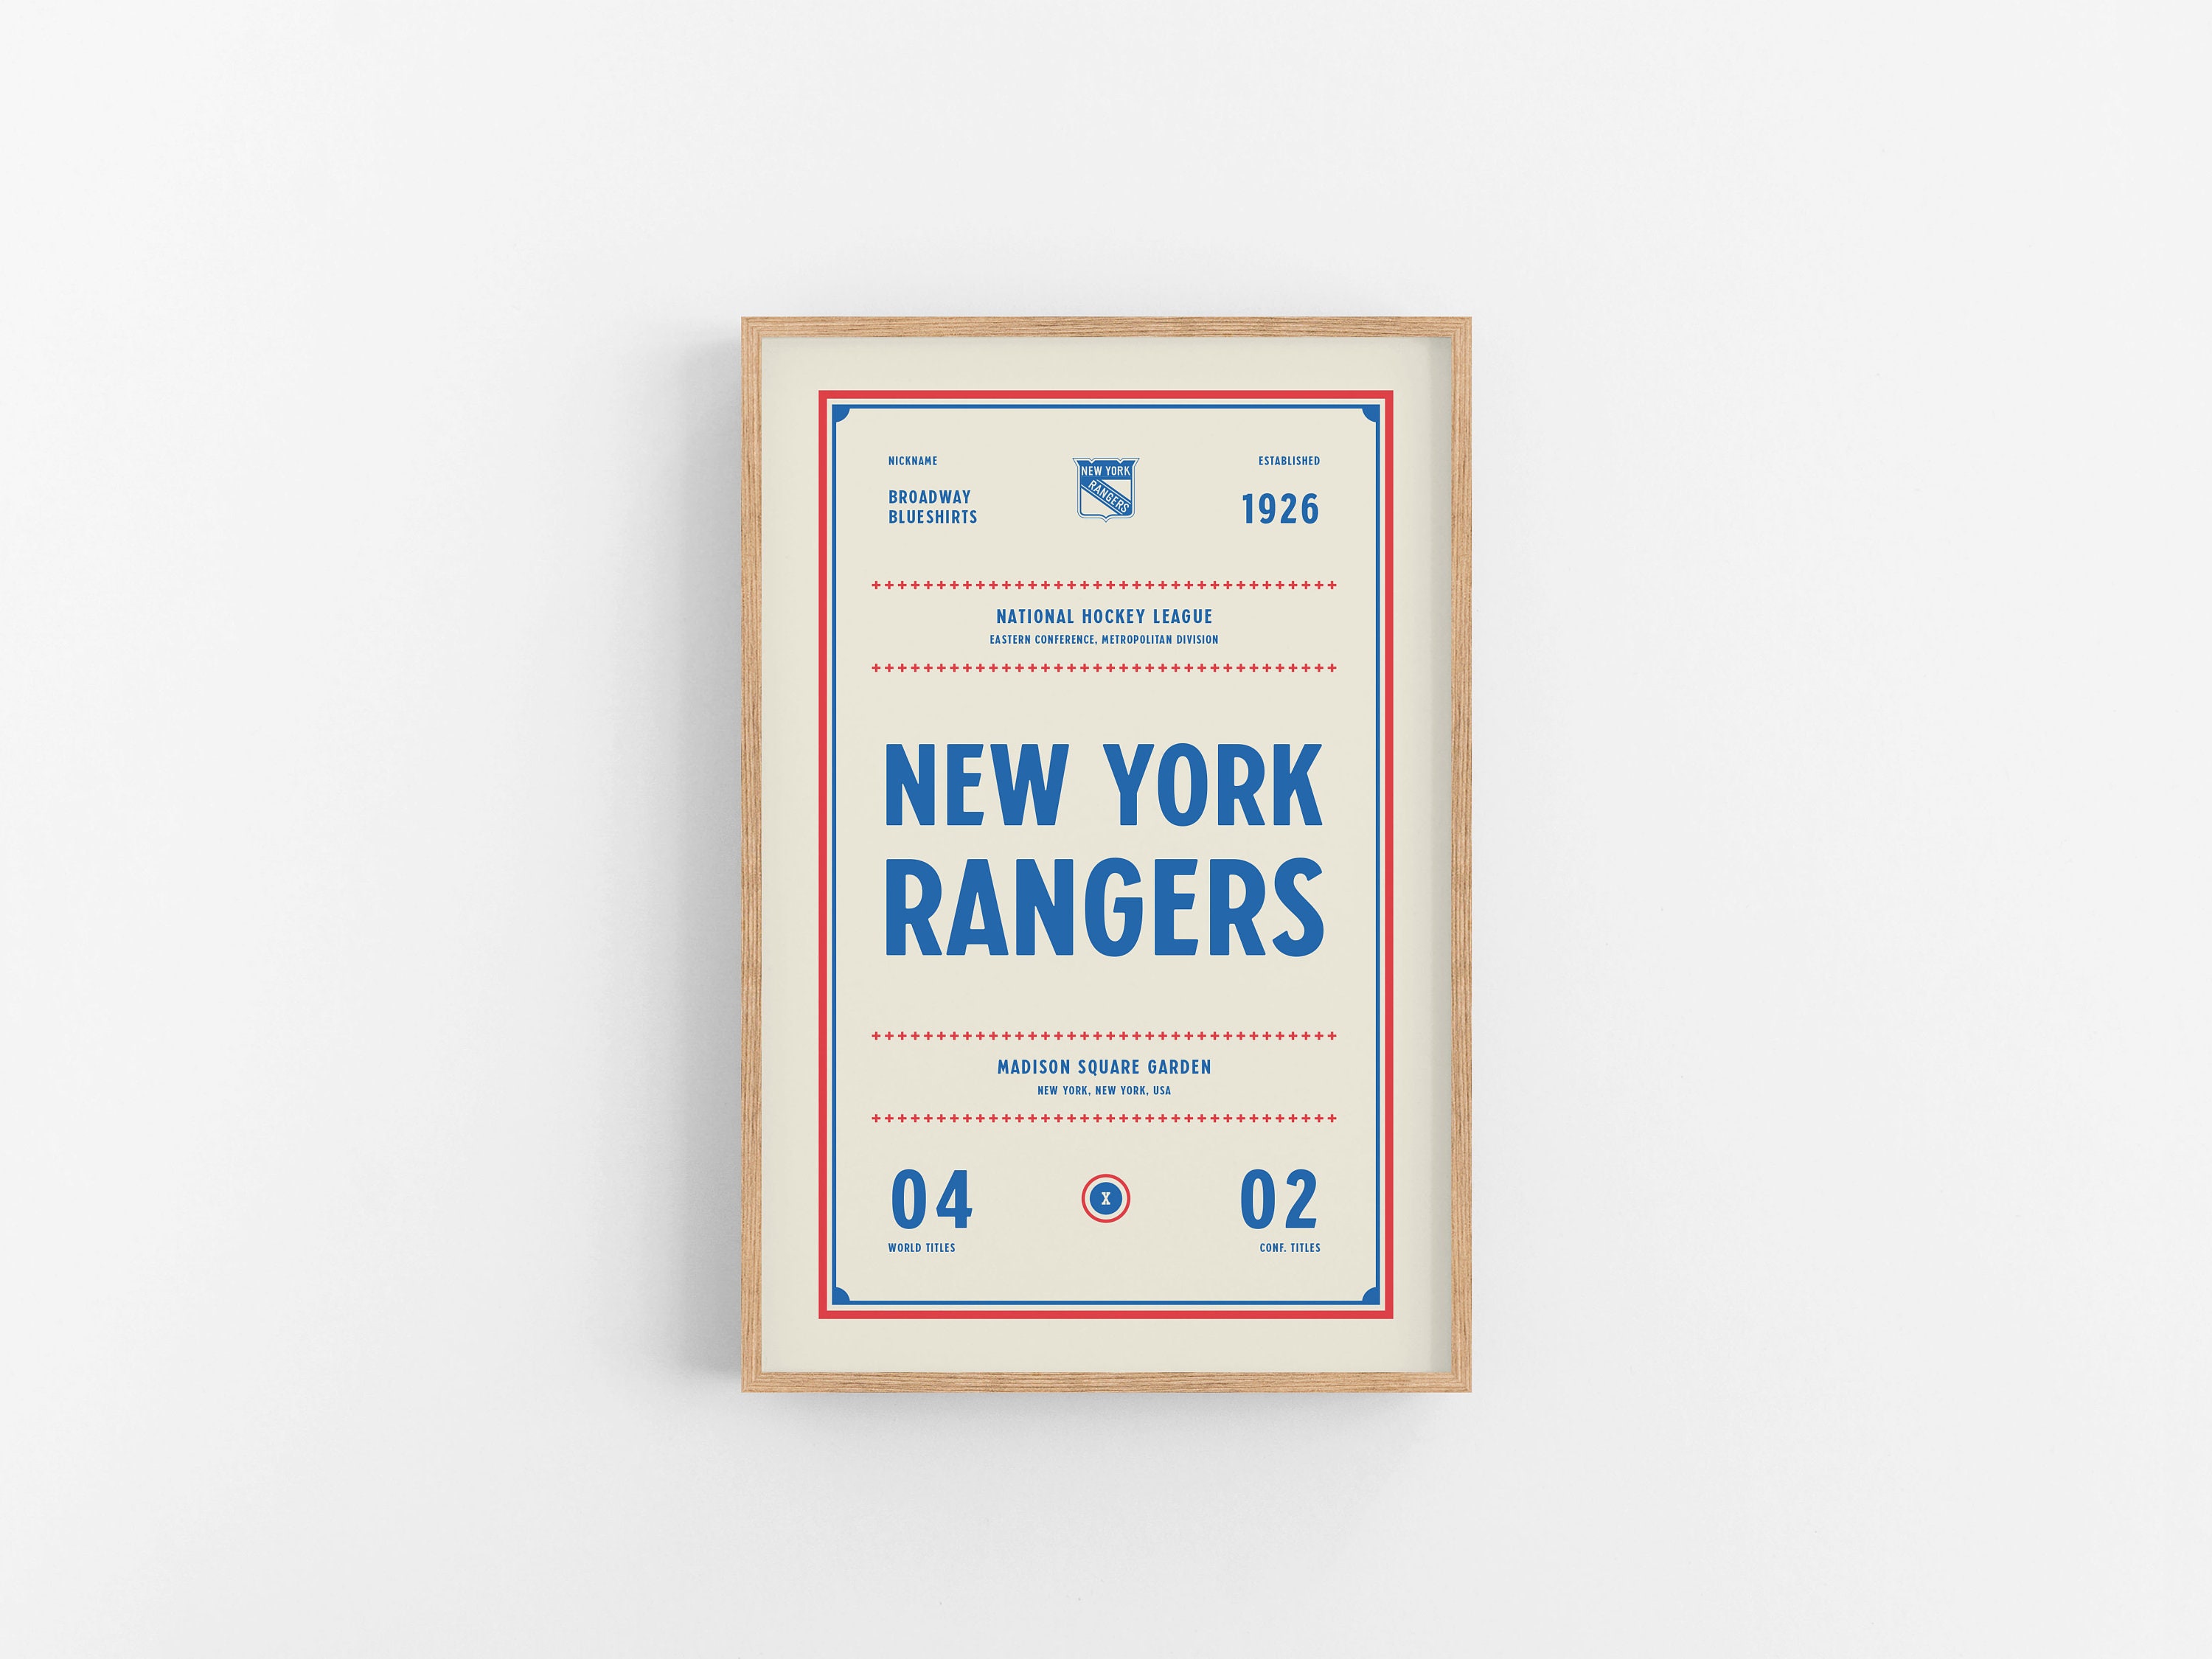 NY Rangers Poster Wall Art - Professional Artwork Print - Hanging Decor For  Room - Great Gift Idea (8x10)